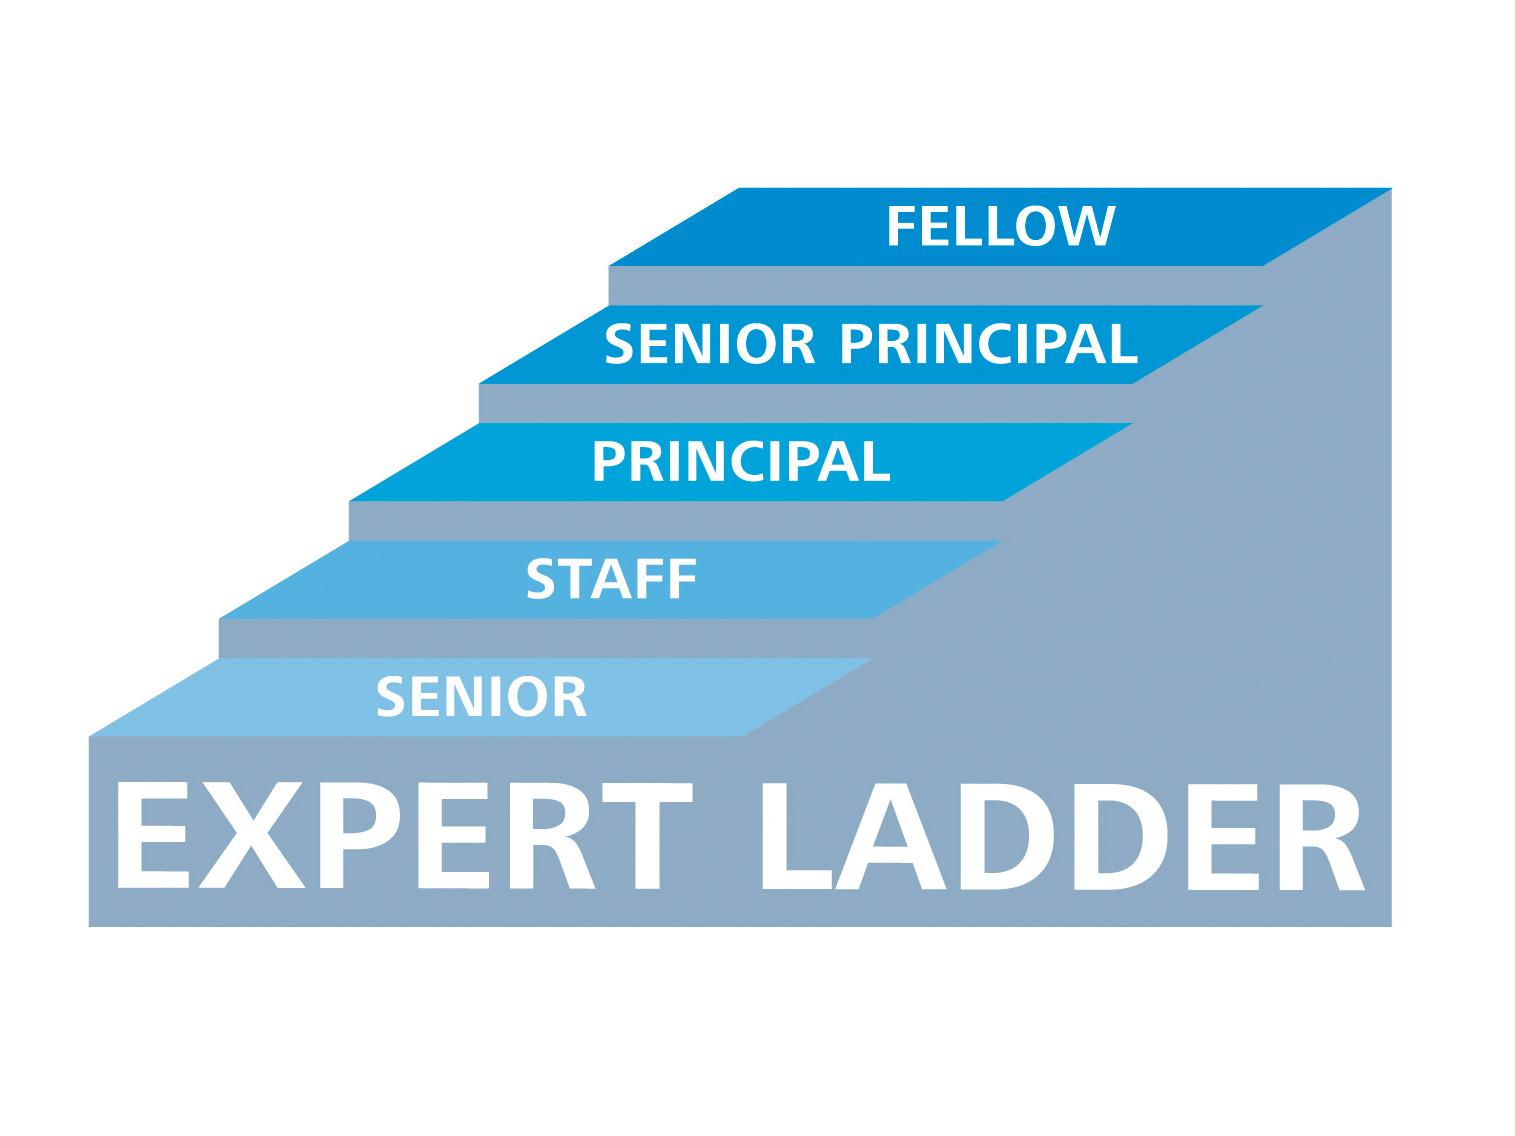 Graphical presentation of the individual stages of the specialist career from Senior to Fellow